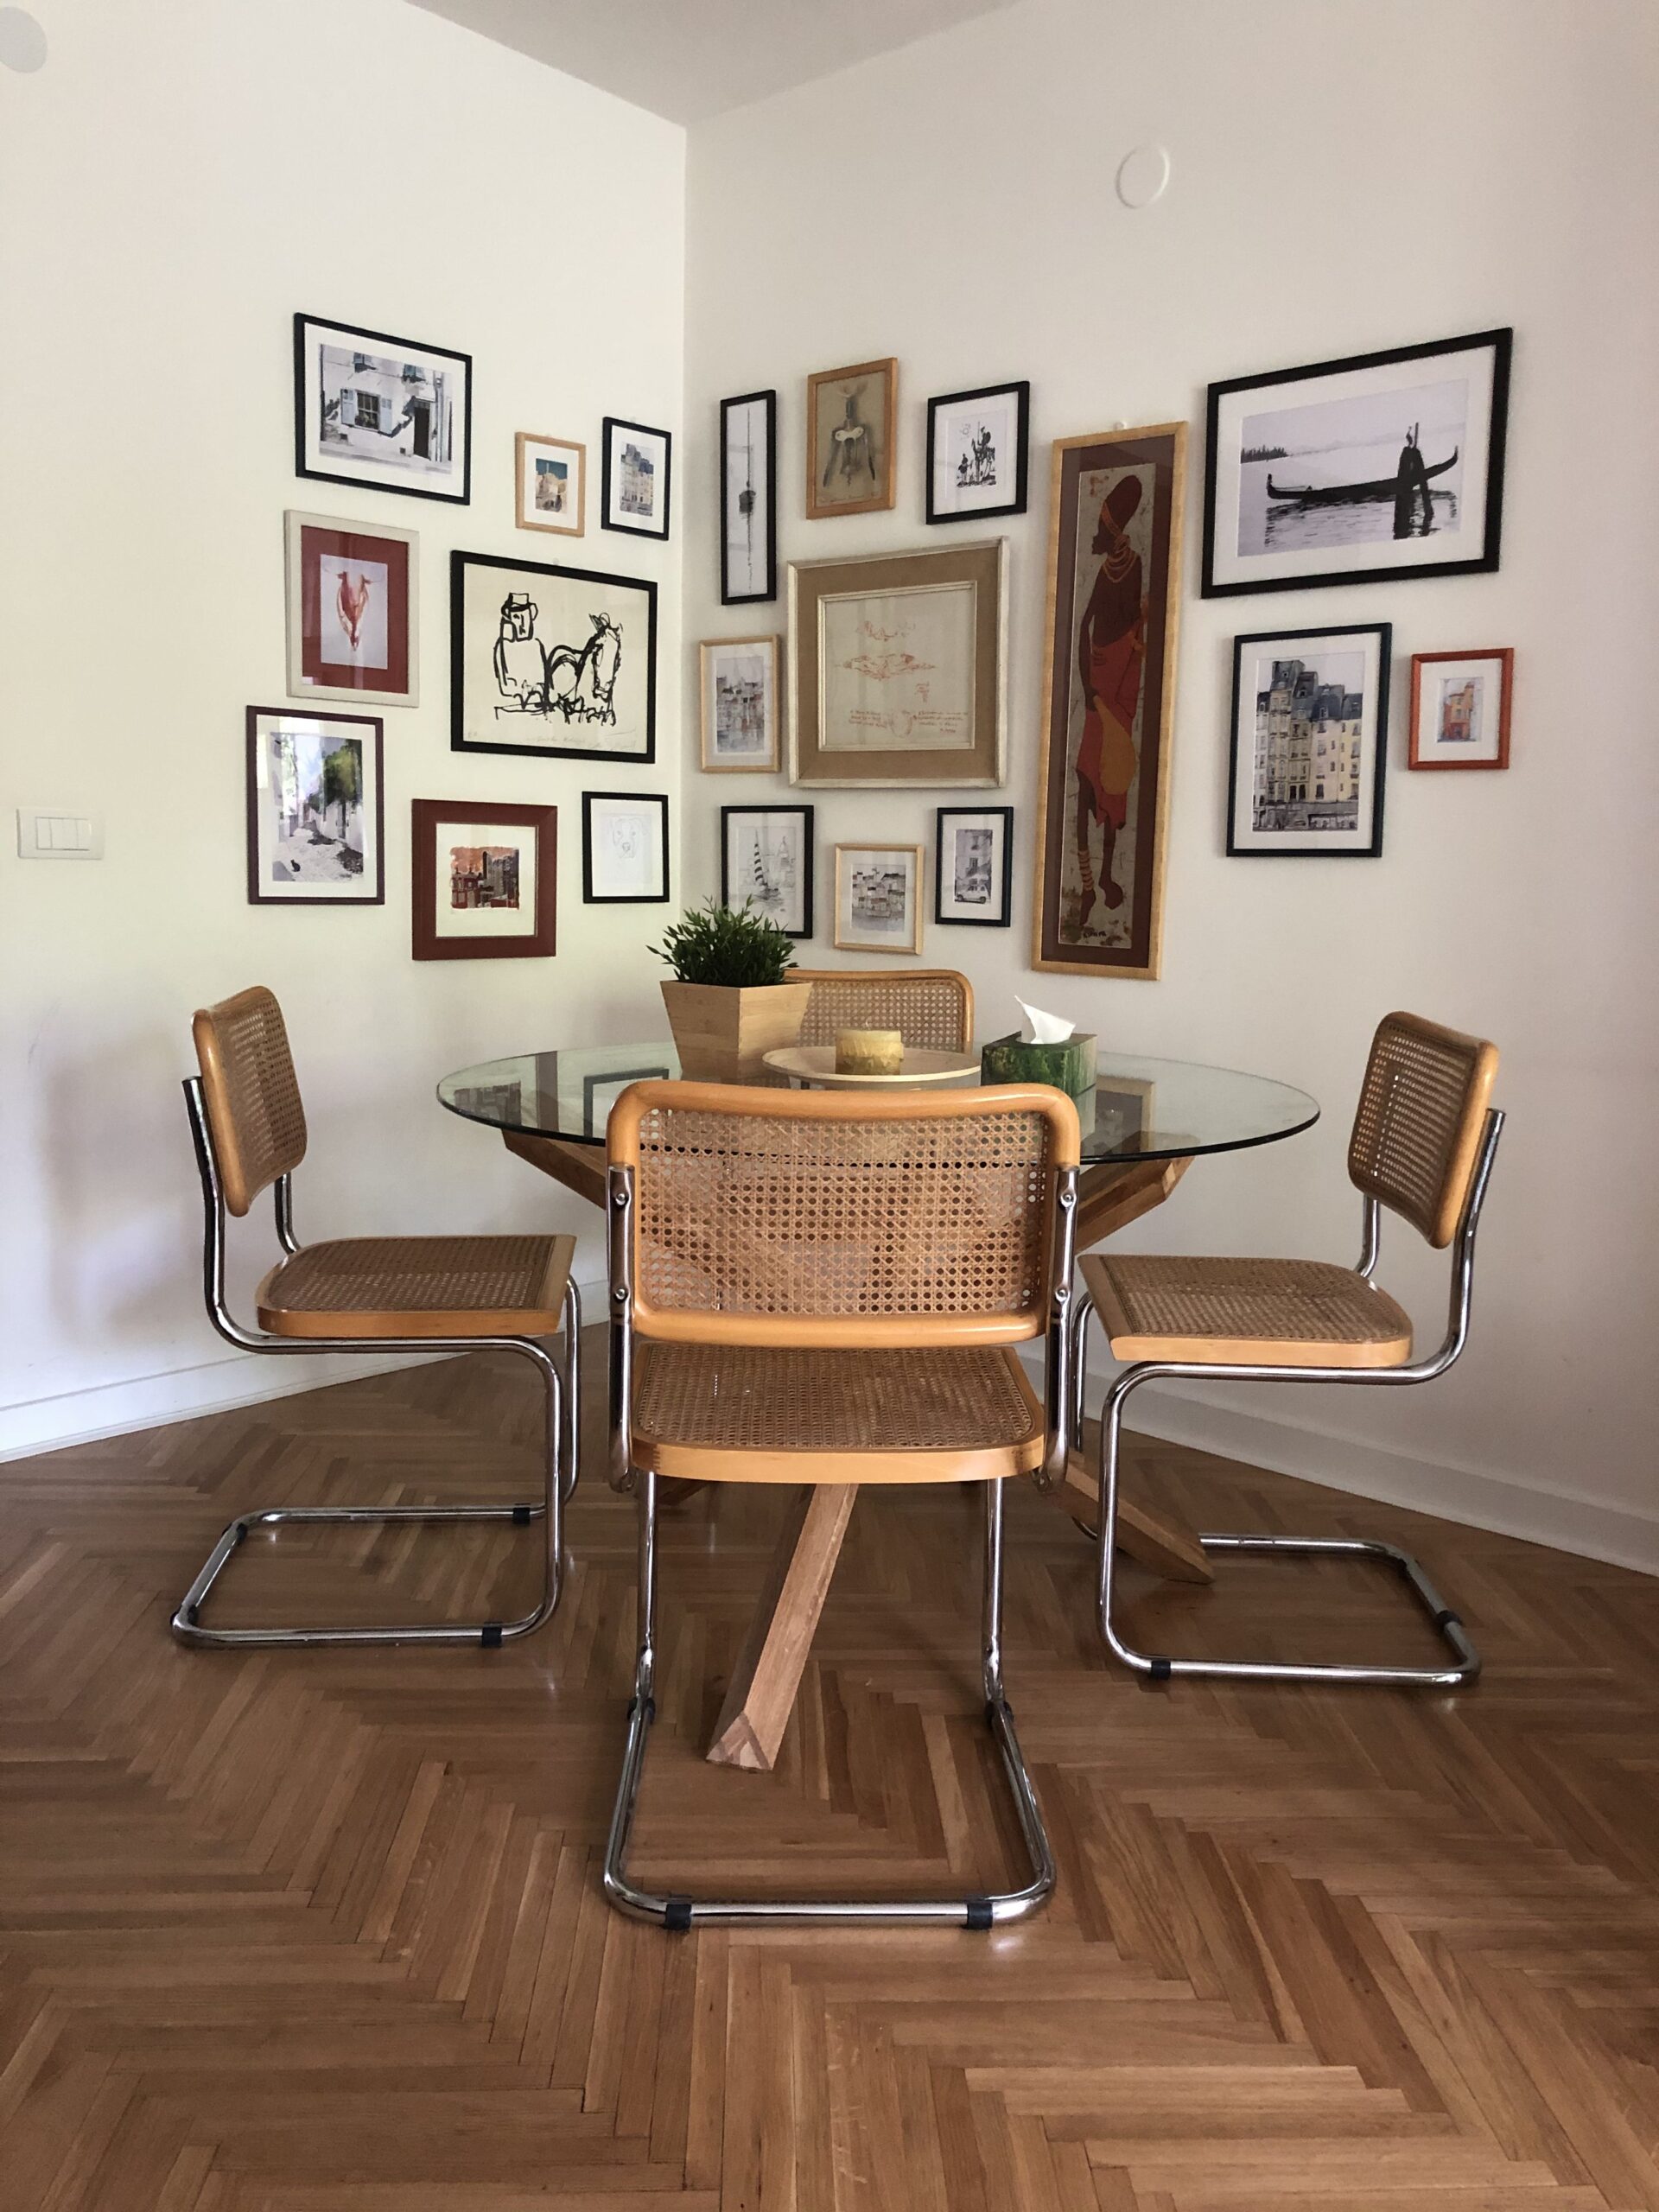 Elegant Old-School Dining Seating: A Look at Vintage Chairs